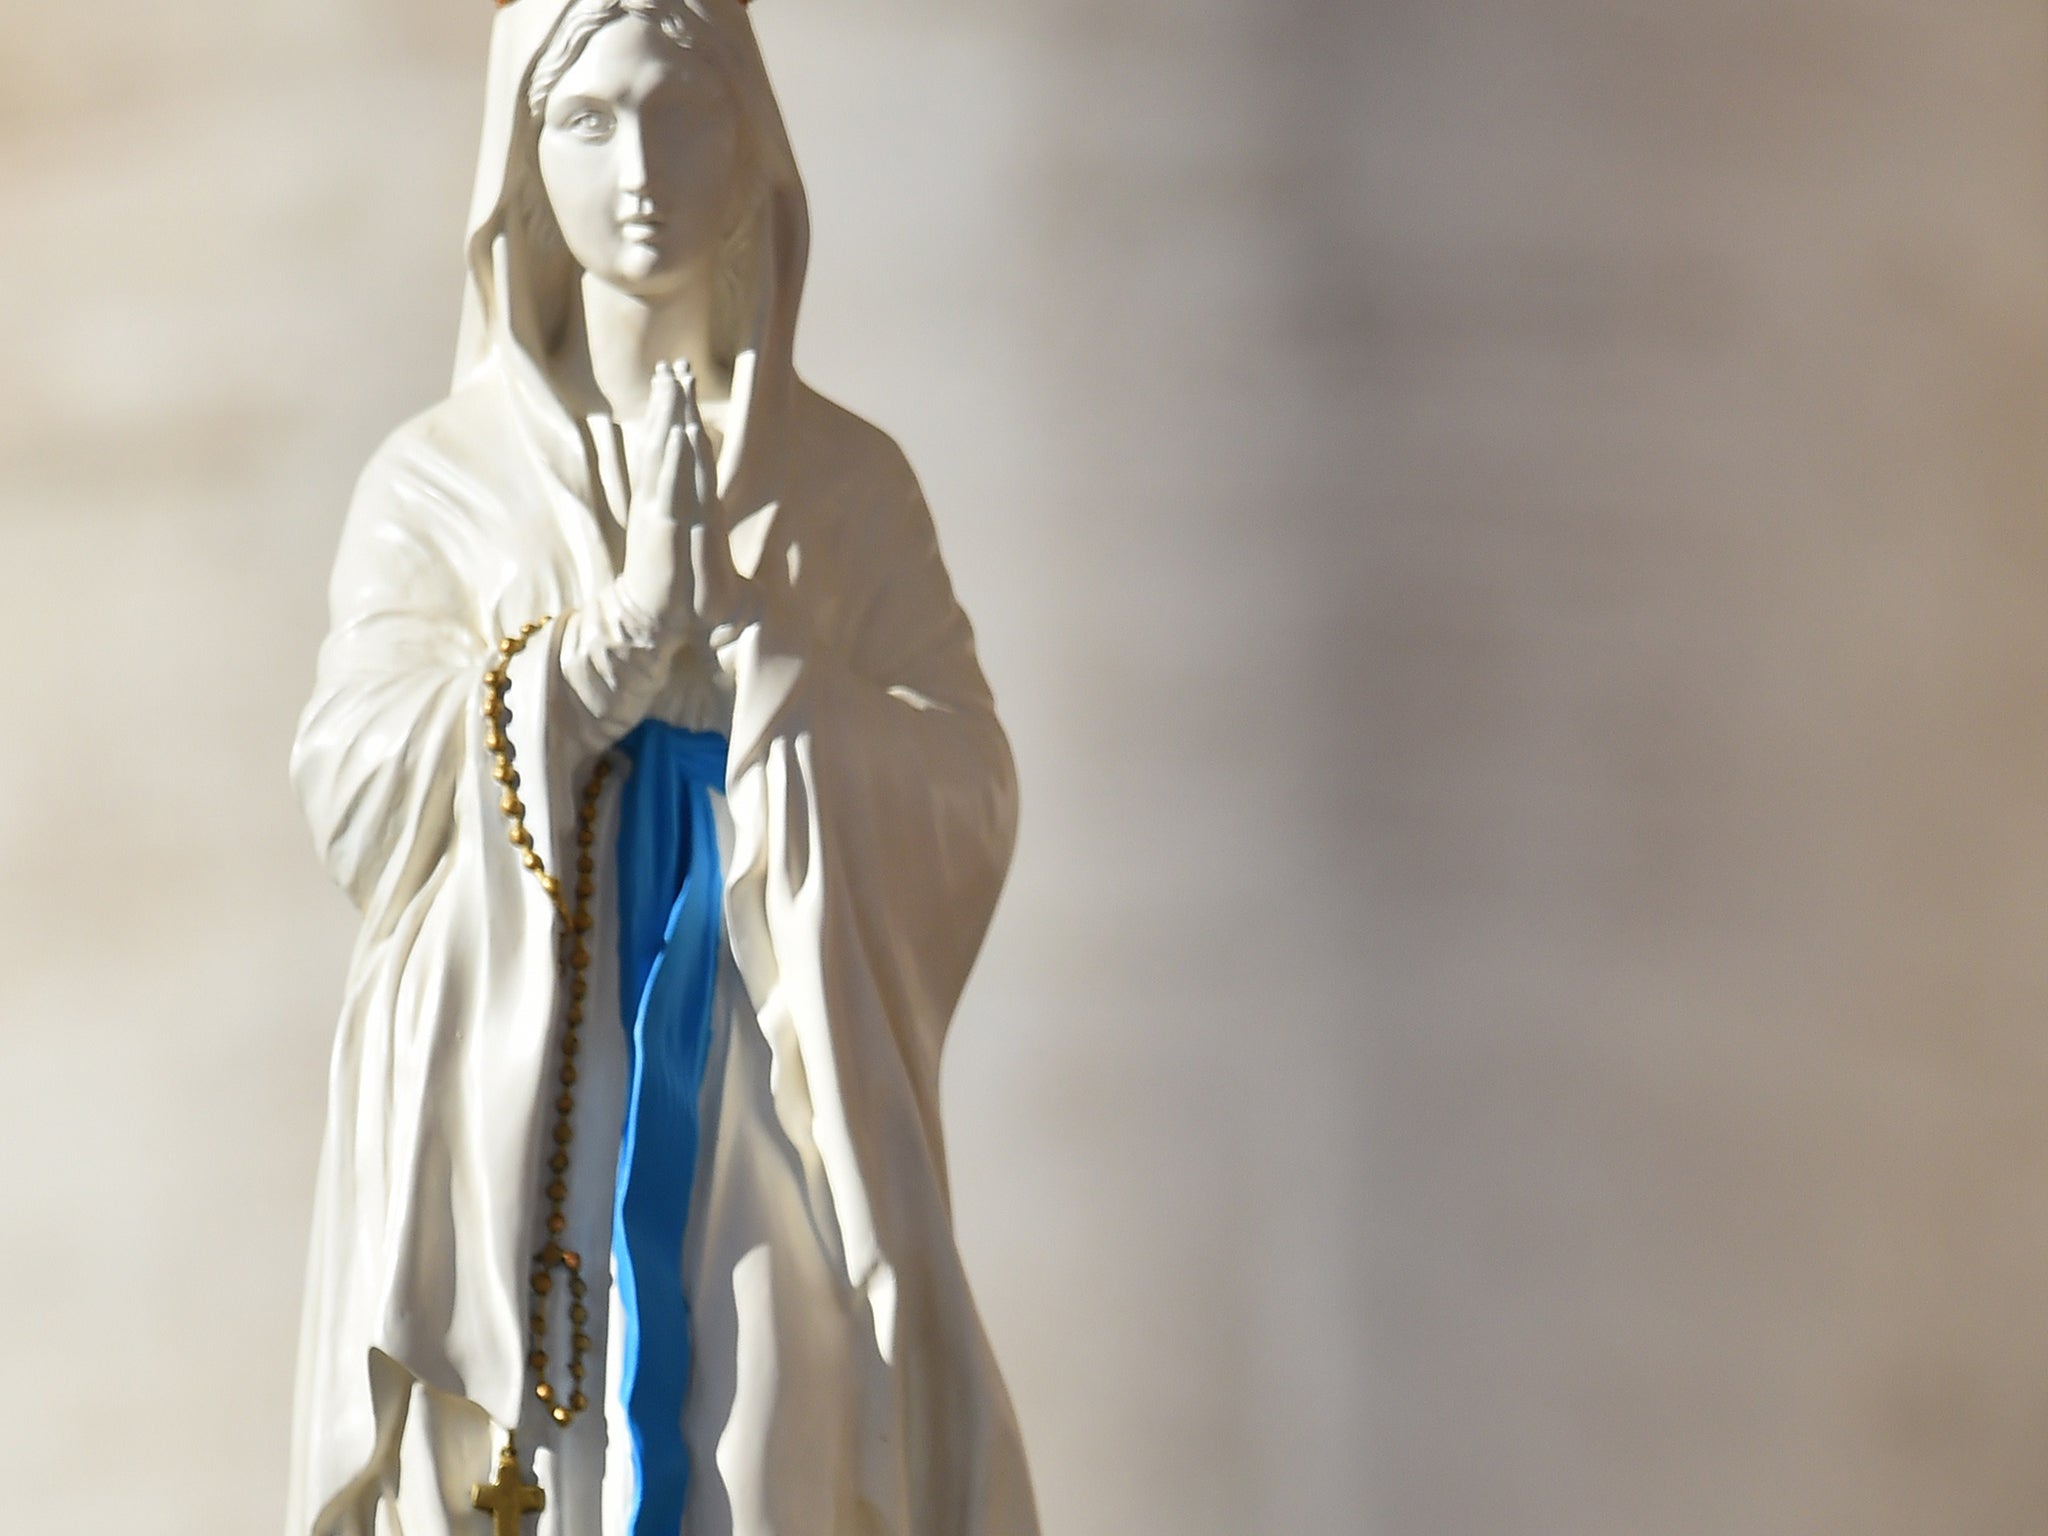 File photo of a statue of Virgin Mary